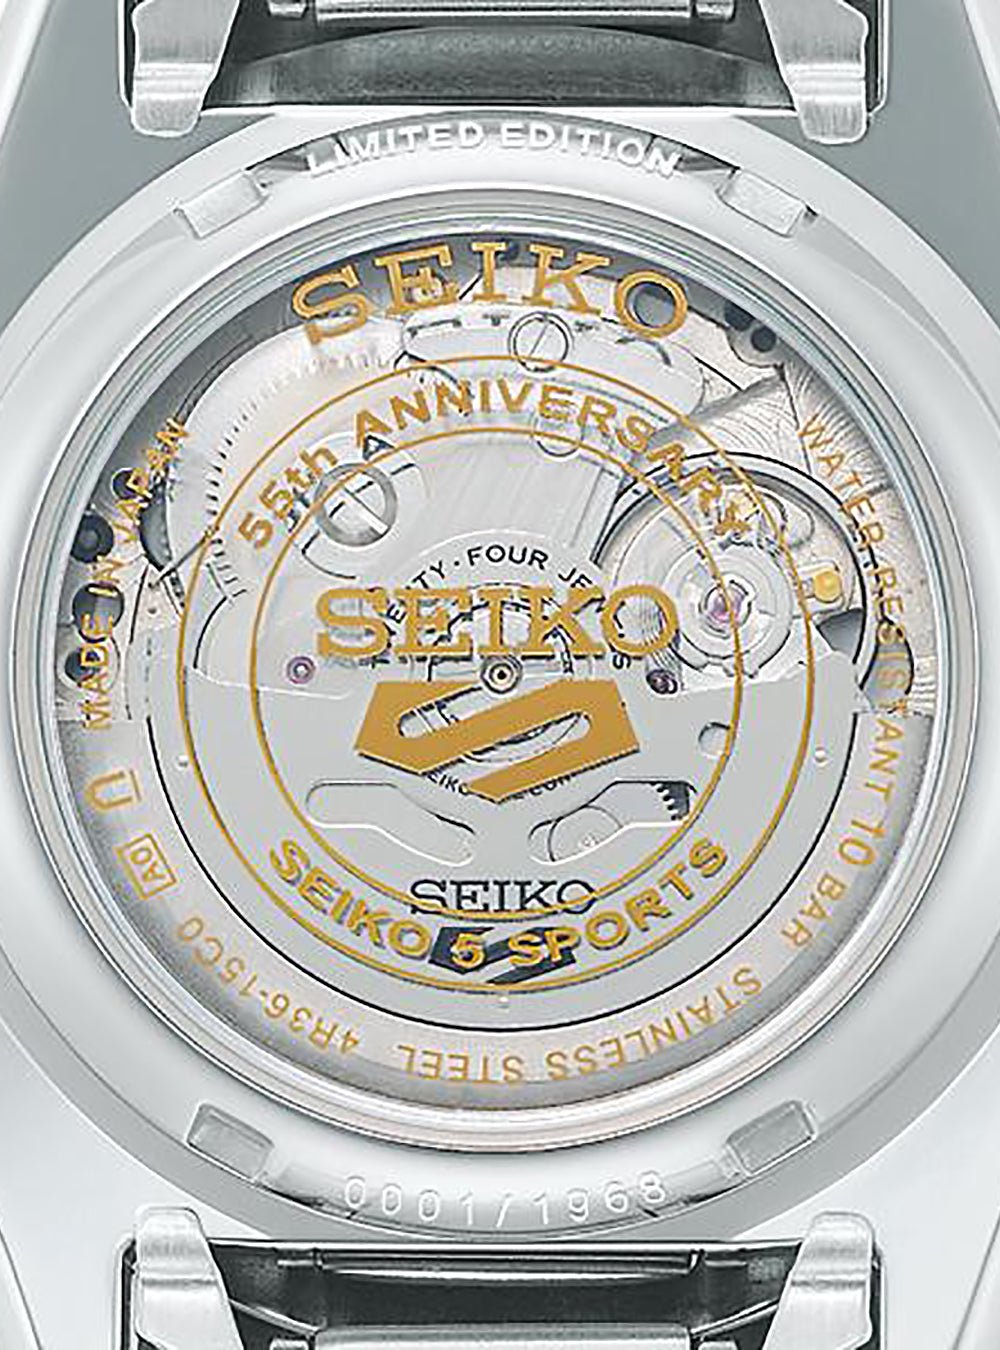 SEIKO 5 SPORTS SKX SPORTS STYLE 55TH ANNIVERSARY CUSTOMIZE CAMPAIGN LIMITED EDITION SBSA215 MADE IN JAPAN JDMWRISTWATCHjapan-select